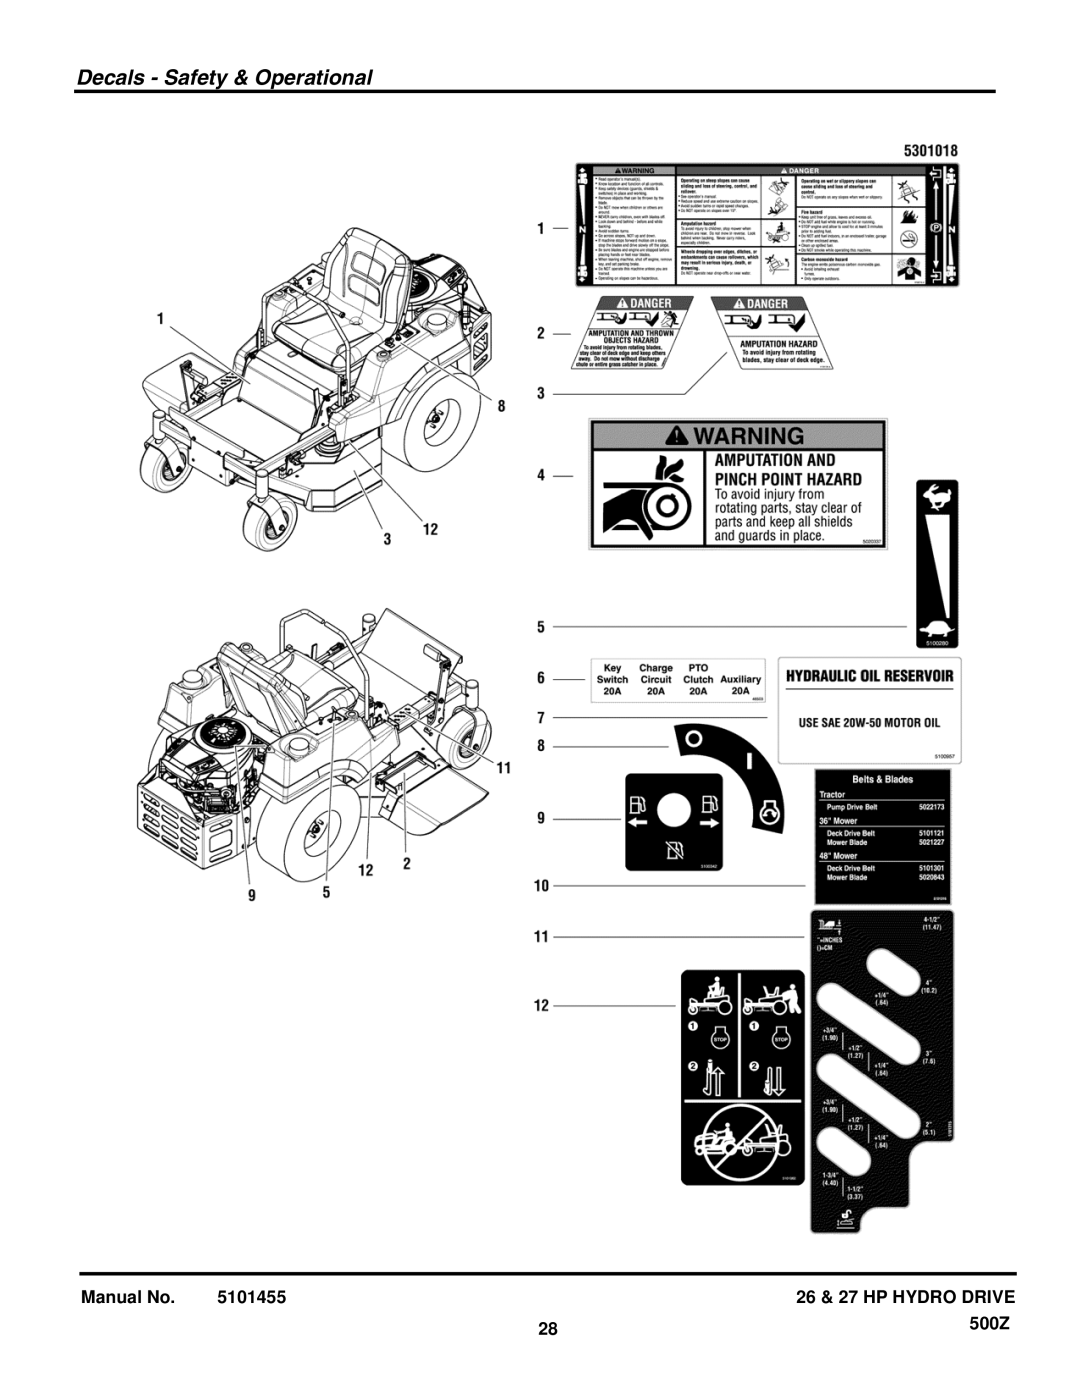 Briggs & Stratton 5900731 manual Decals Safety & Operational 